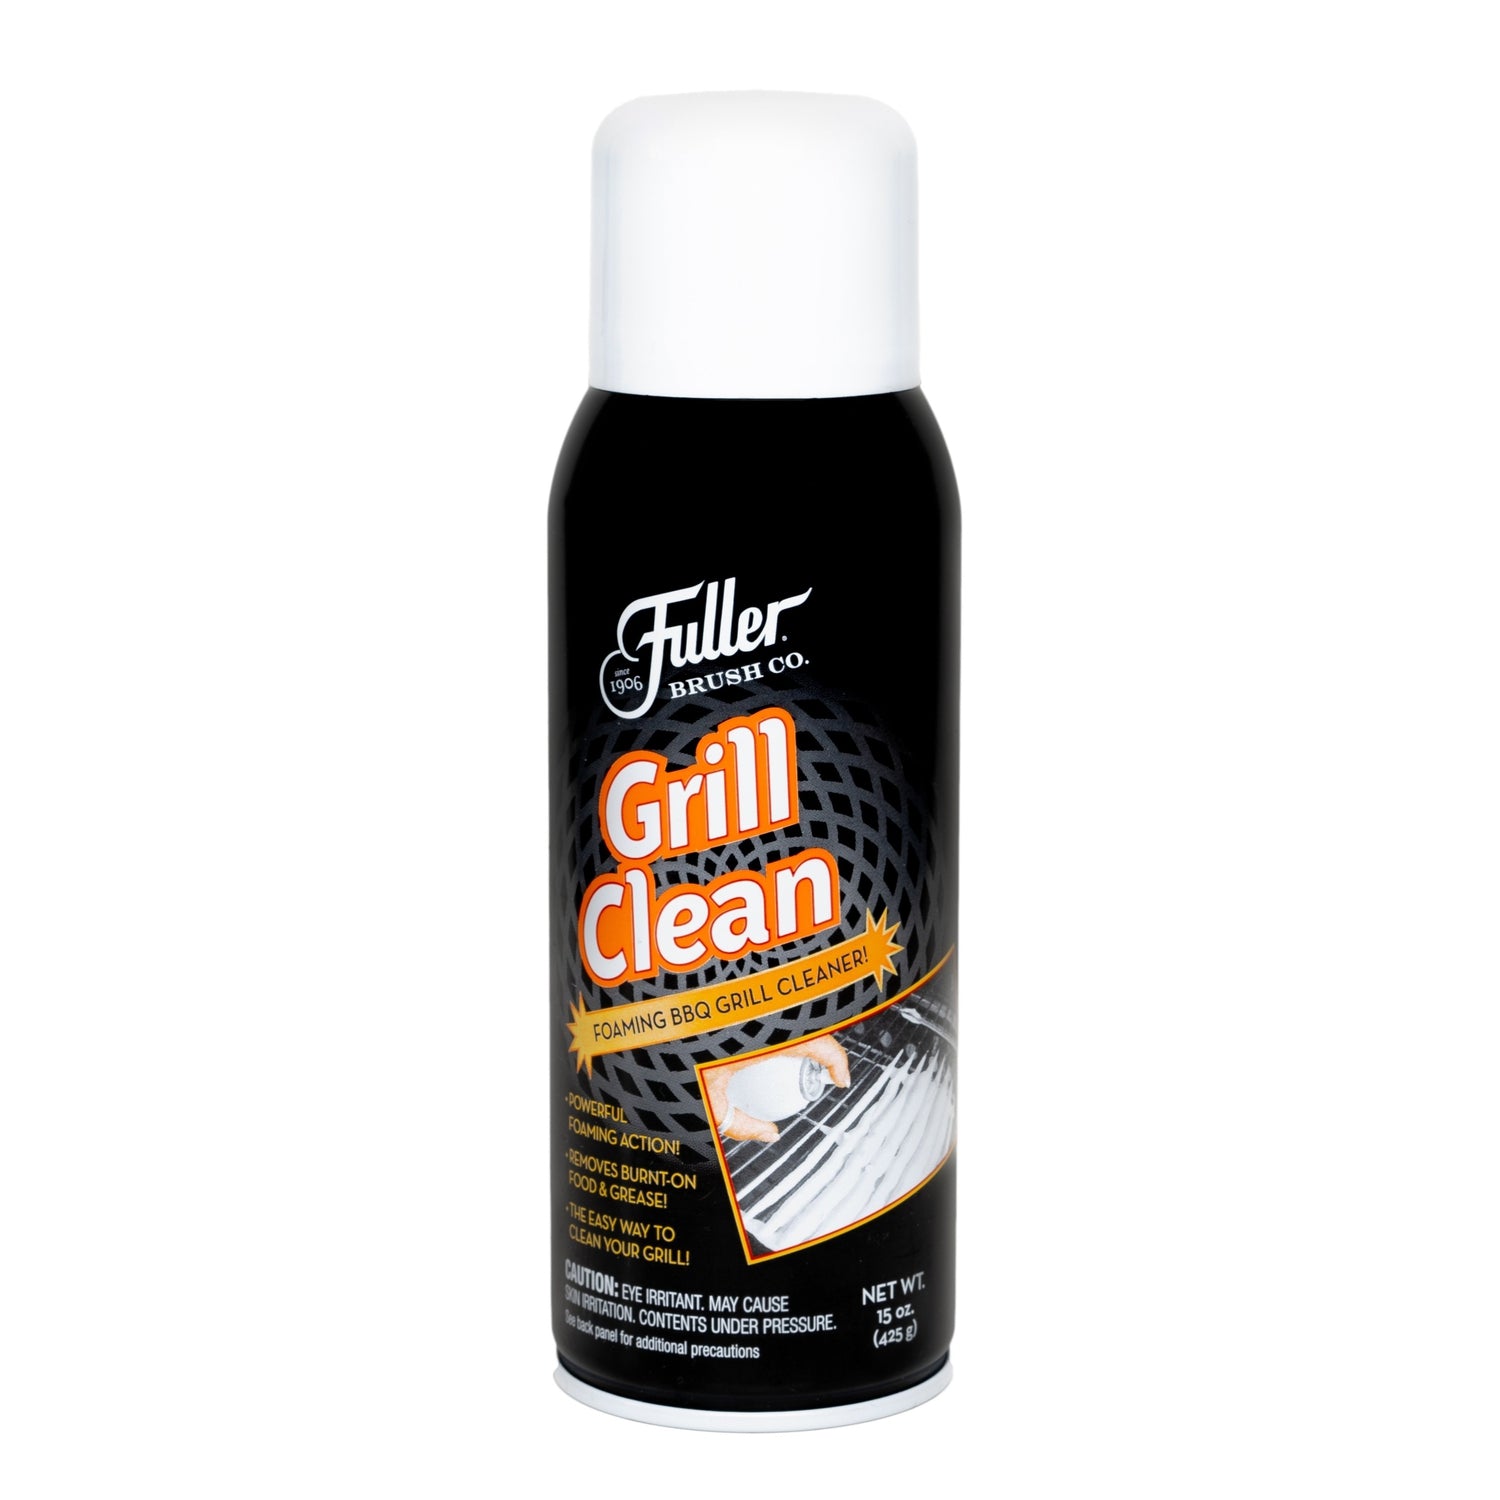 Fuller Brush Self-Scouring Oven Cleaner - Spray On Heavy Duty Cleaner for  Ovens Broilers and Barbecue Grills Efficiently Cuts Through Grease Grime